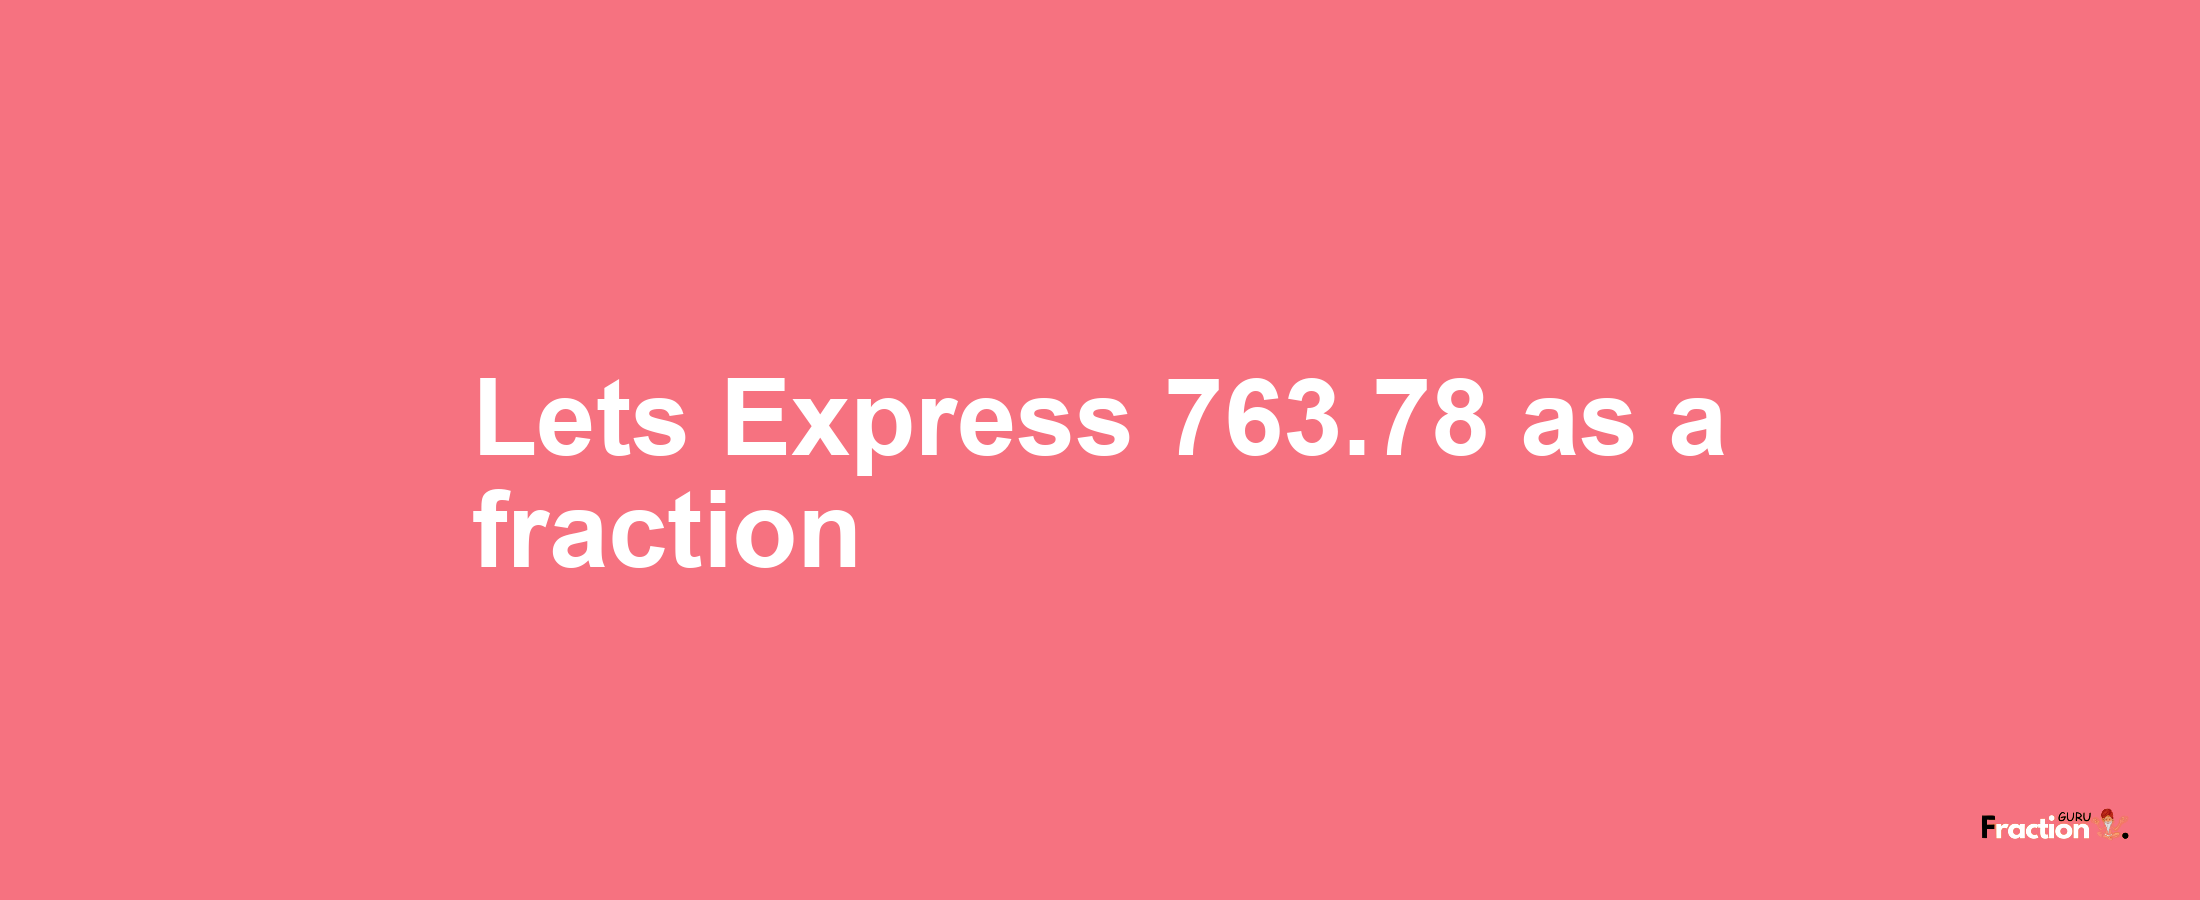 Lets Express 763.78 as afraction